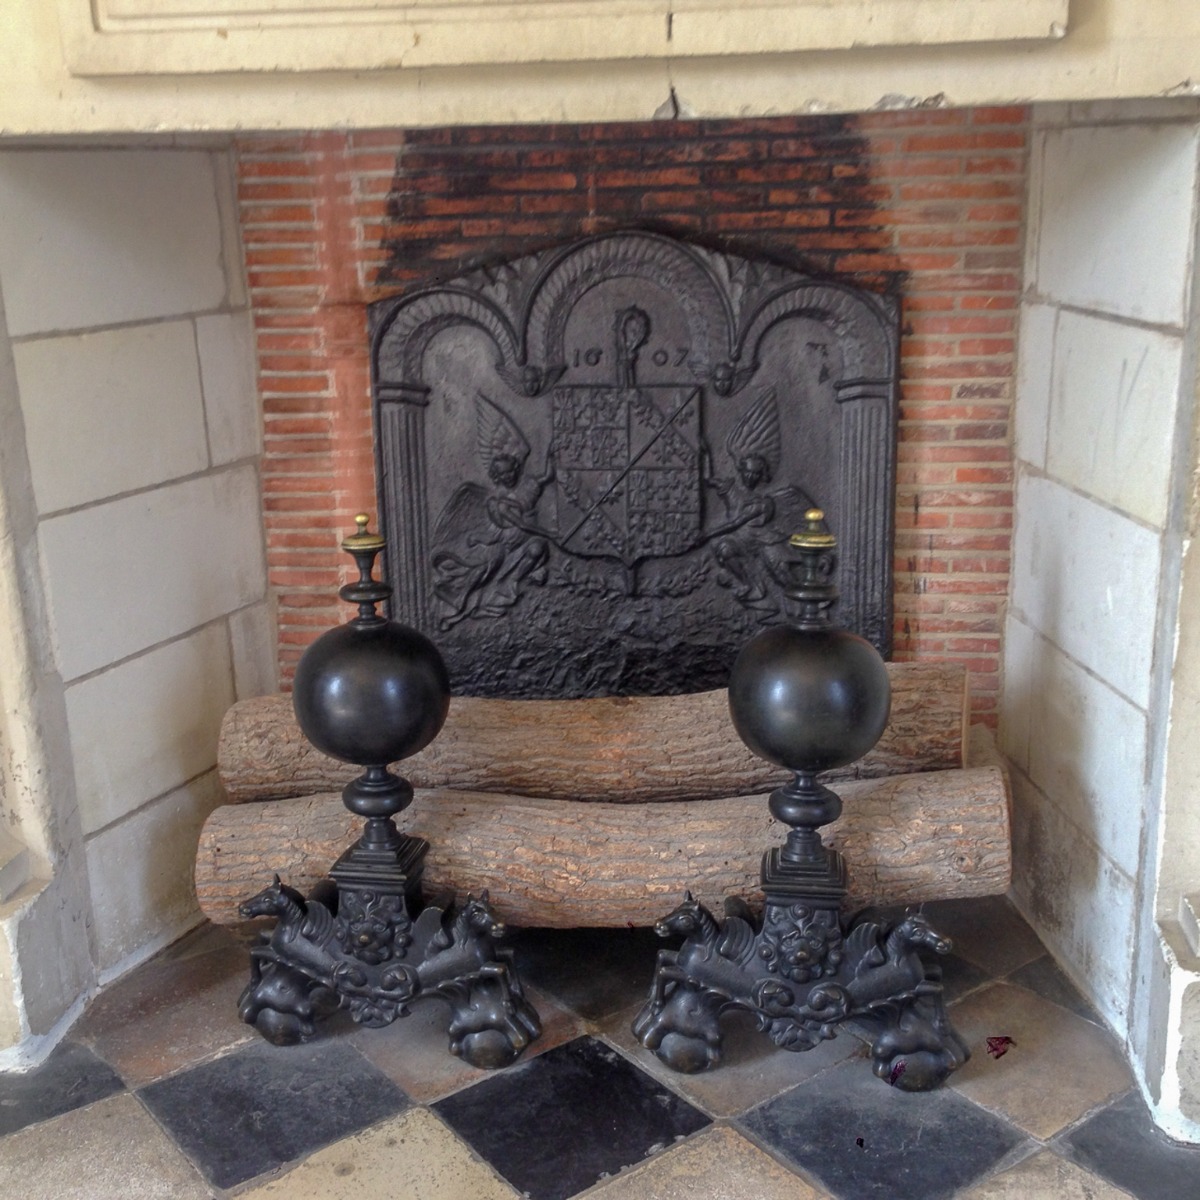 Unused fireplace decorated with a fire grate